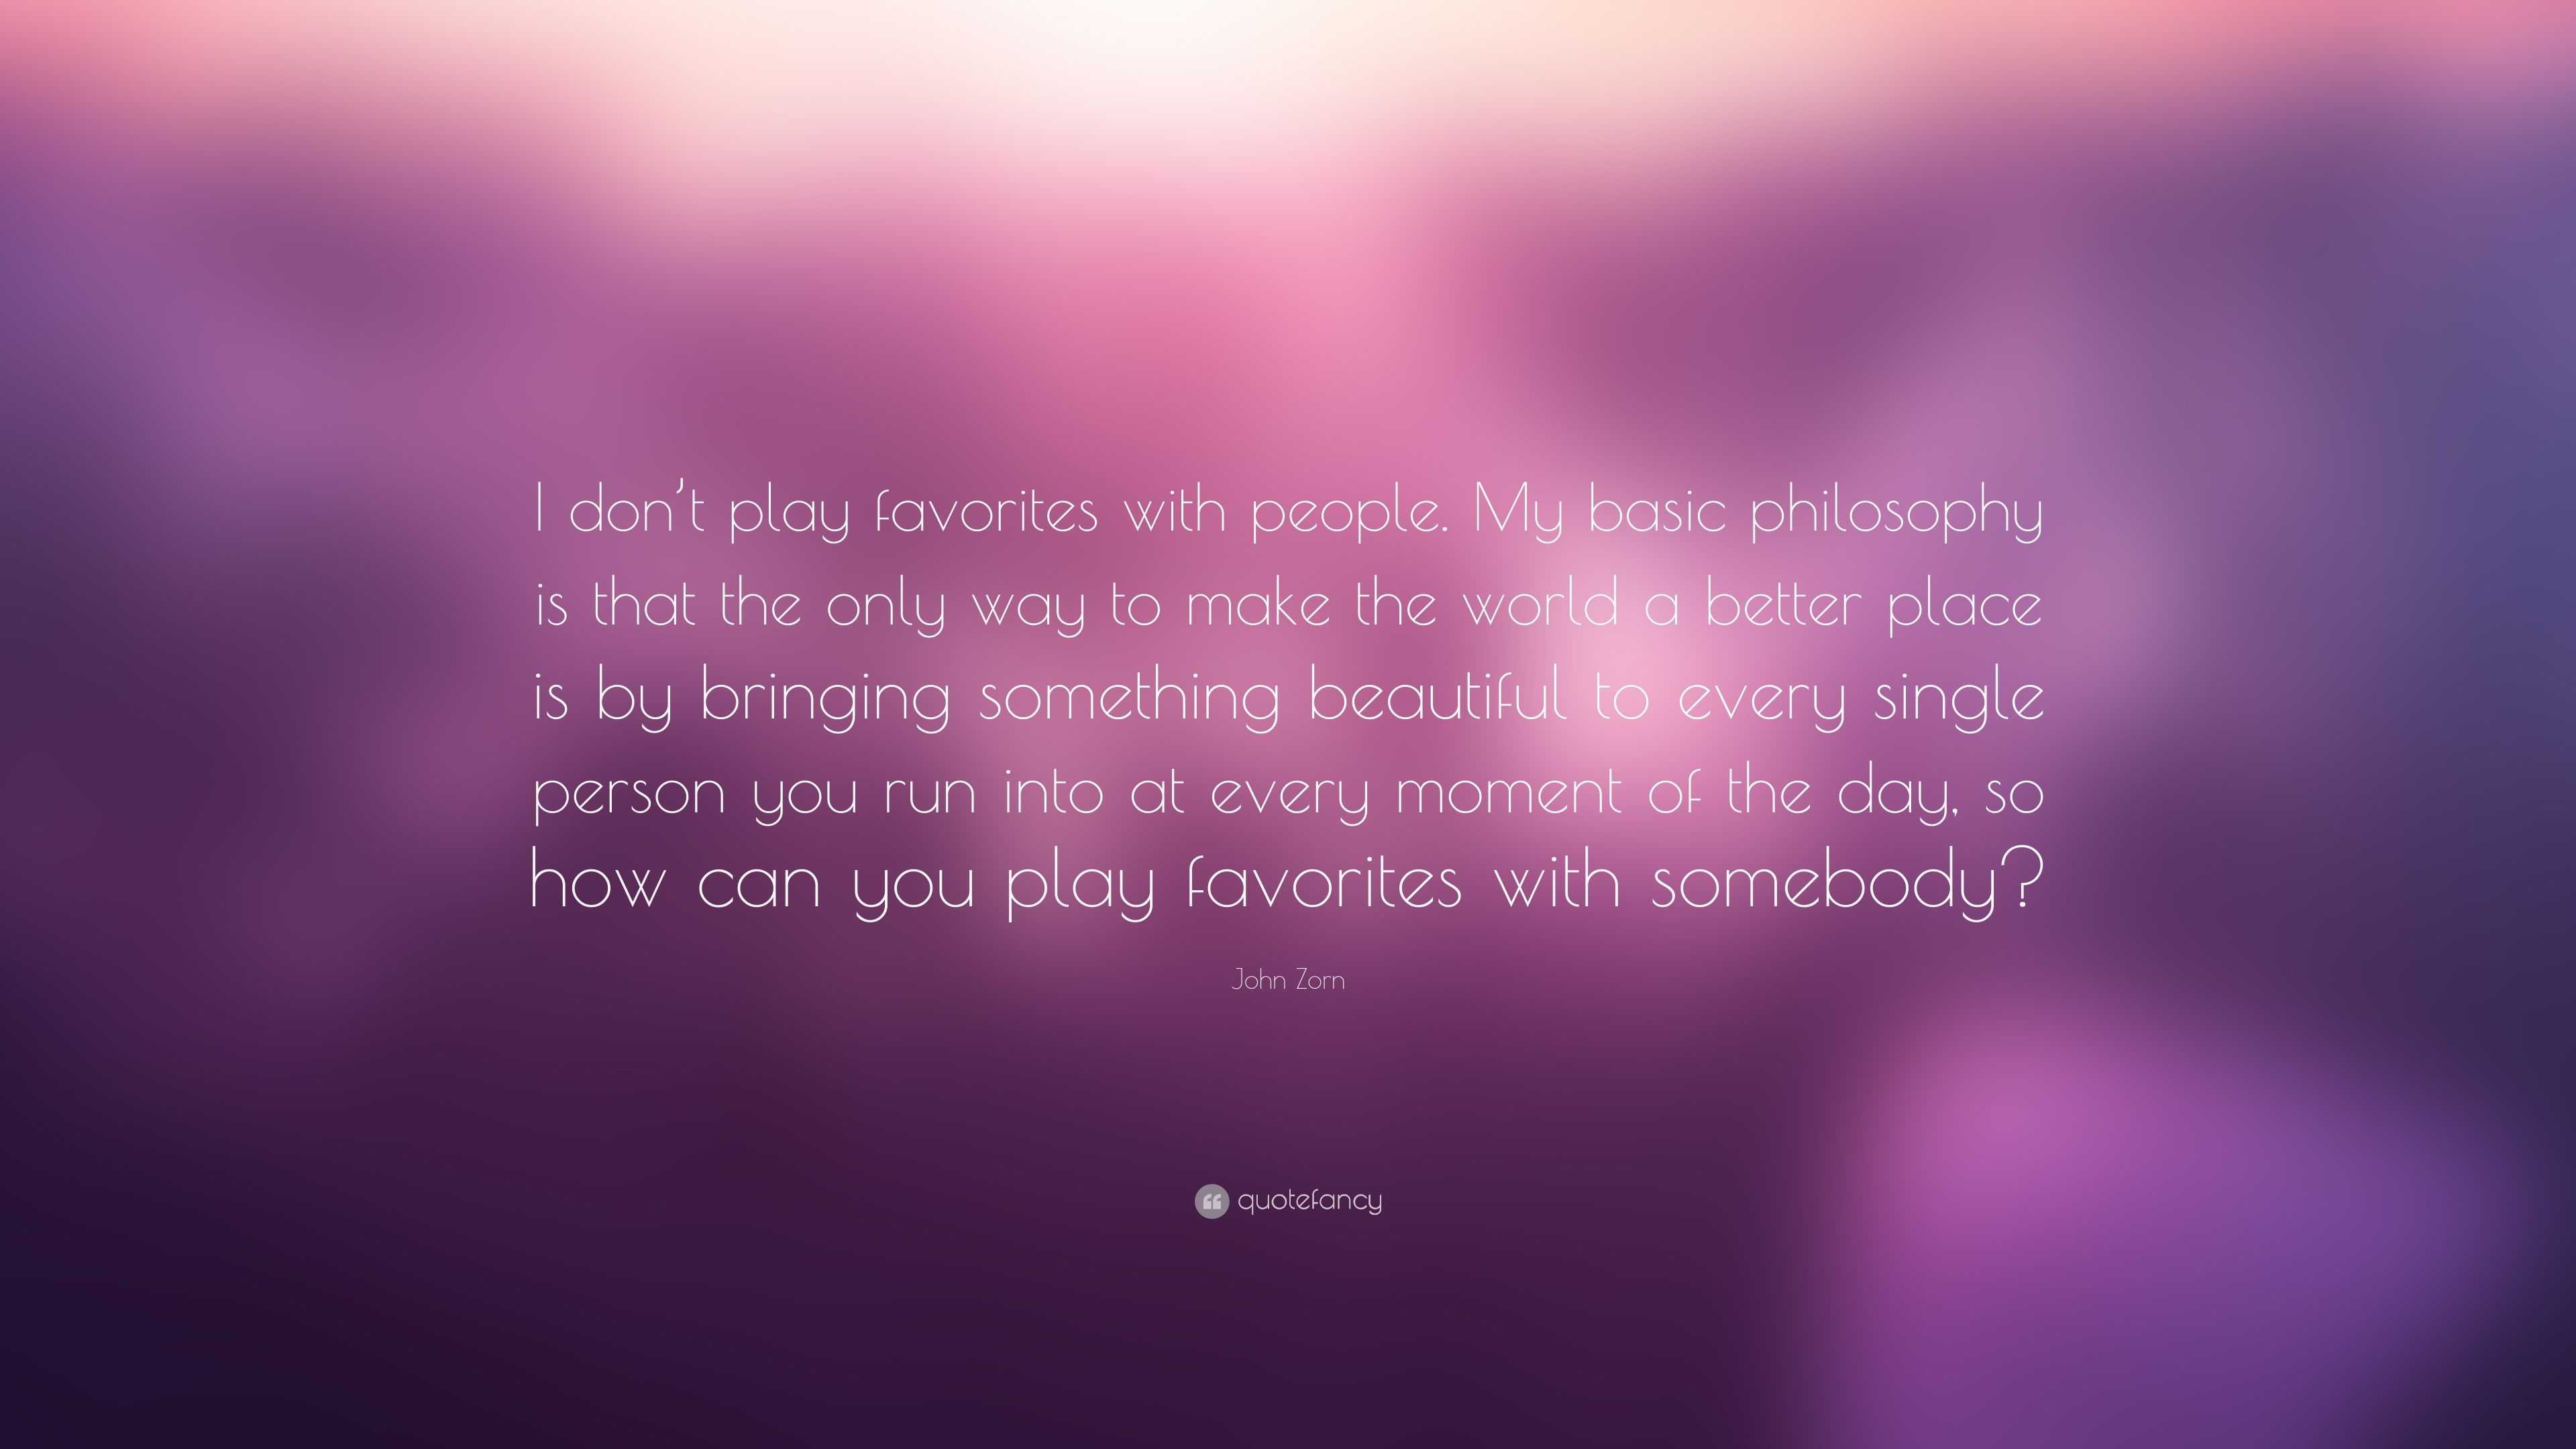 John Zorn Quote: “I don’t play favorites with people. My basic ...